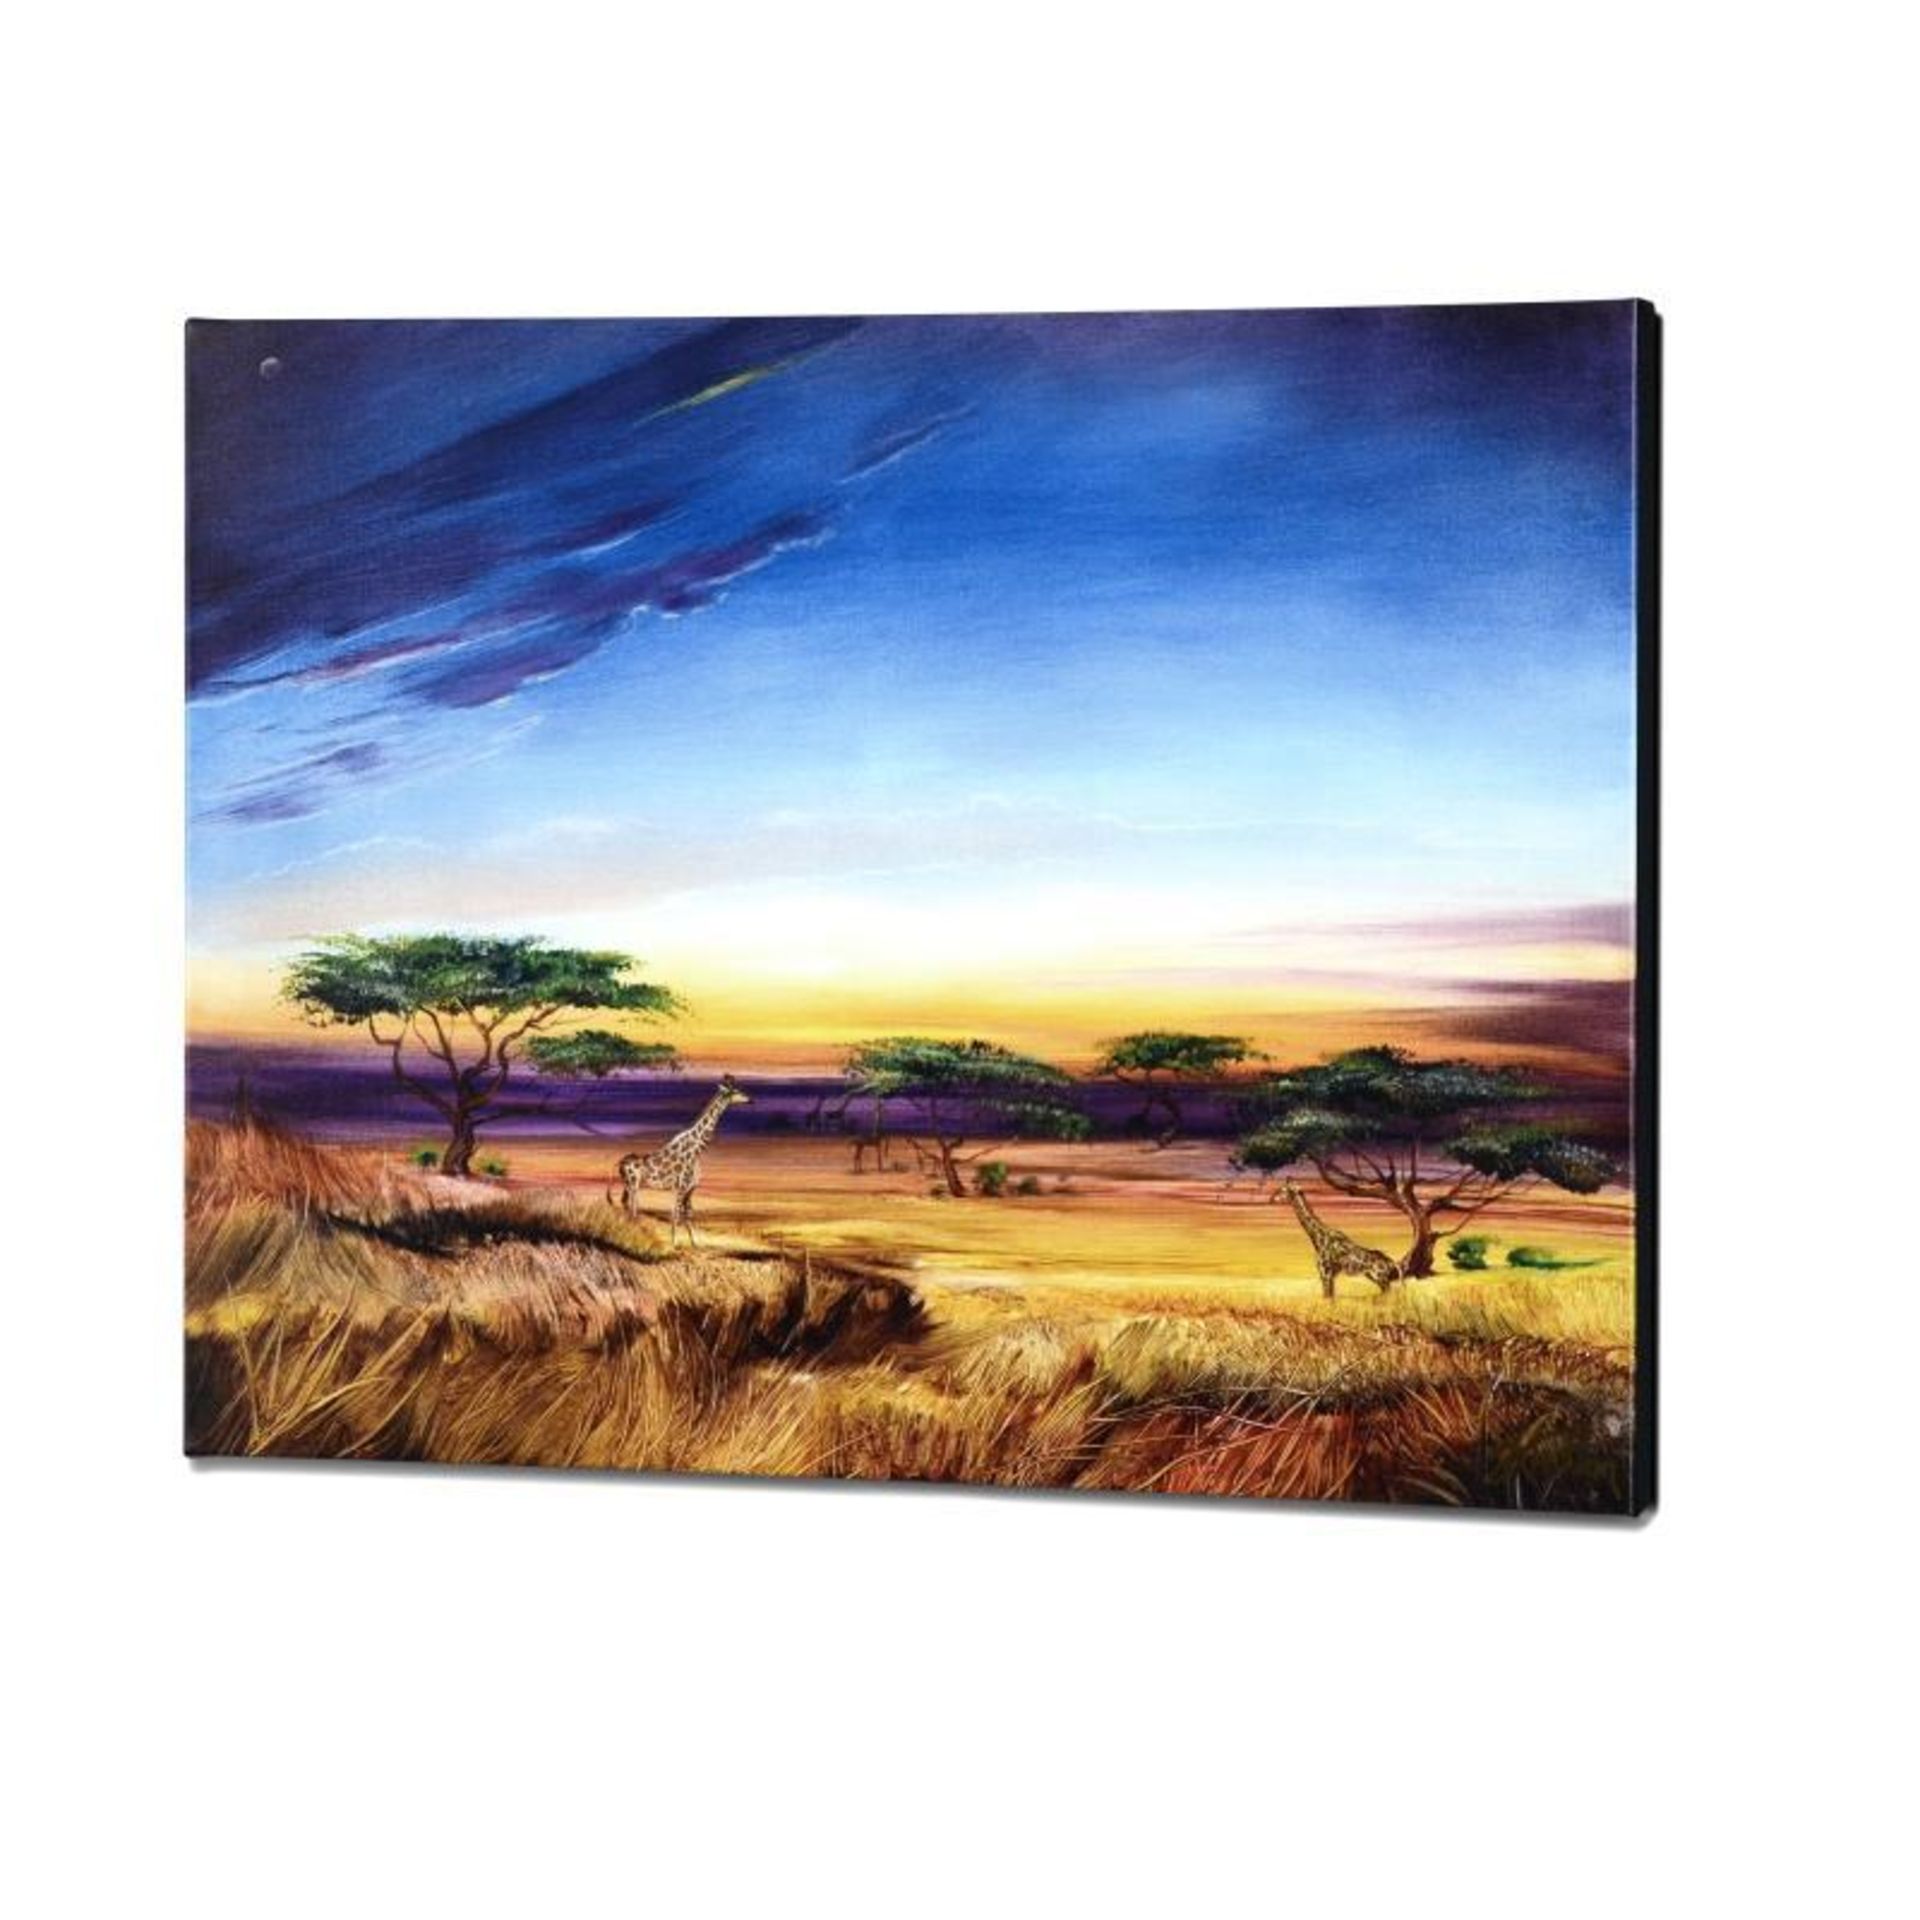 "Africa at Peace" Limited Edition Giclee on Canvas by Martin Katon, Numbered and - Image 2 of 2